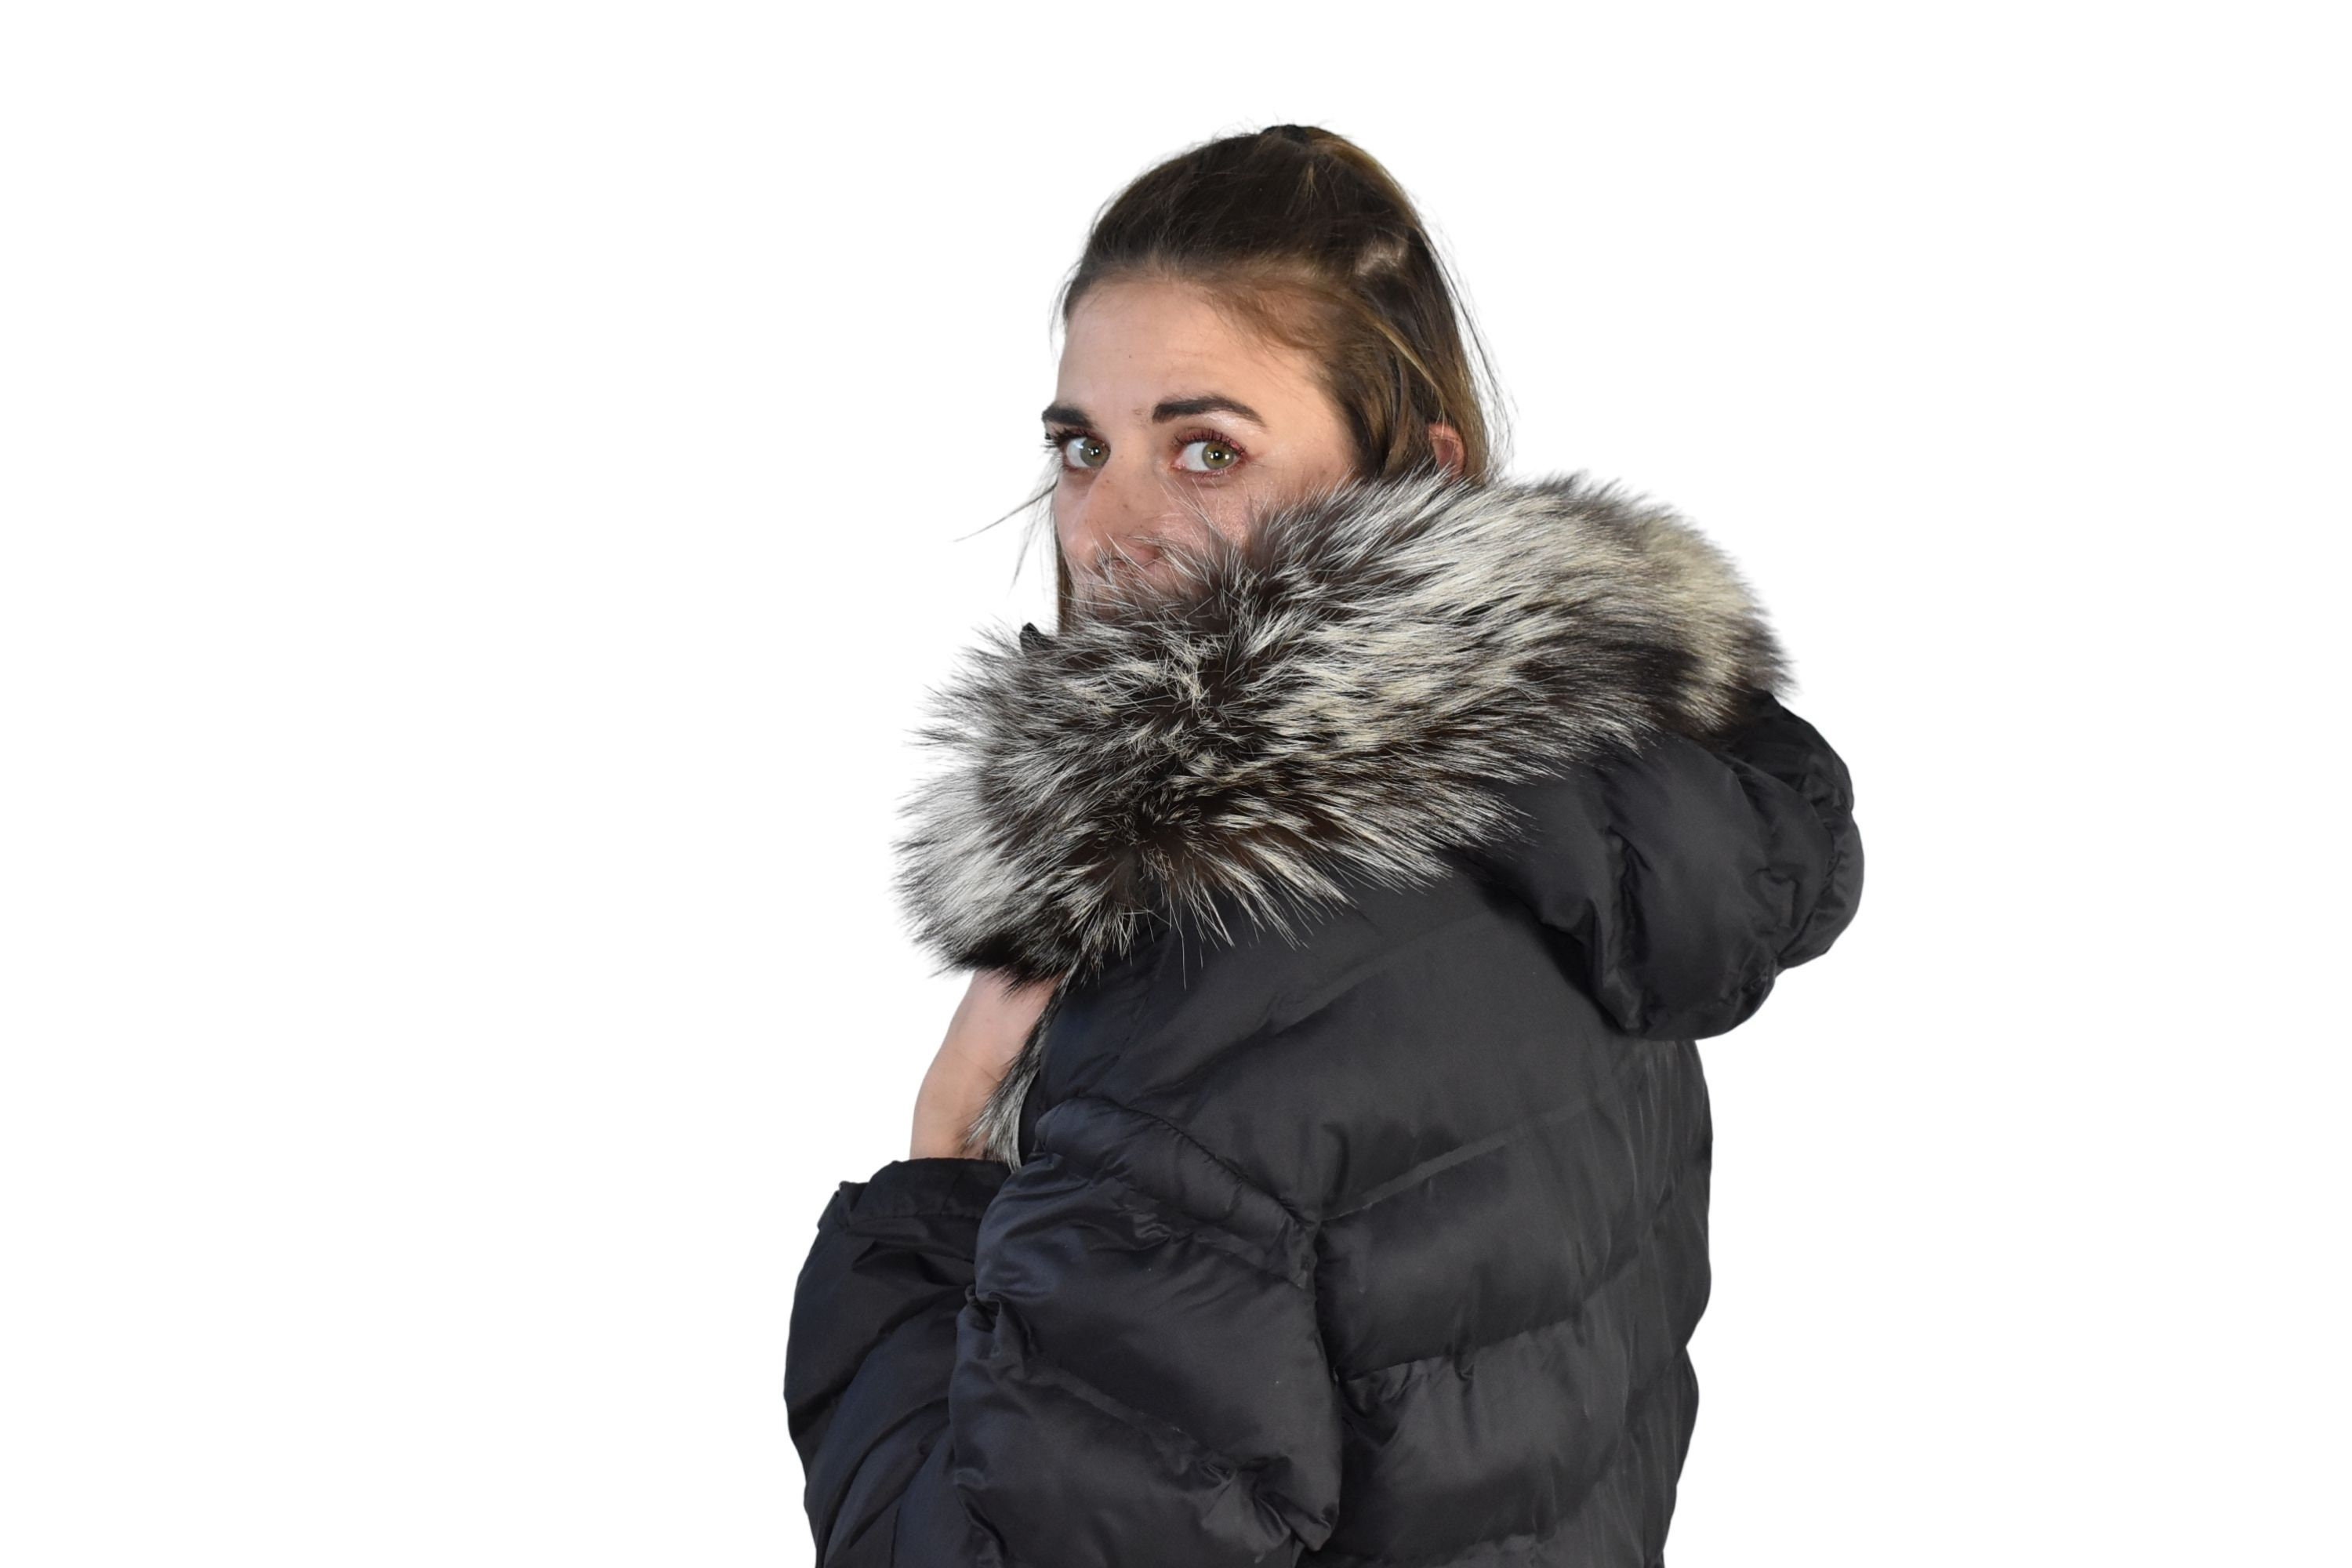 Fvwitlyh Snow Jacket Trim for Hood Replacement, Detachable Fluffy Collar Hood Trim Scarves for Winter Coat, Women's, Size: 3XL, Black